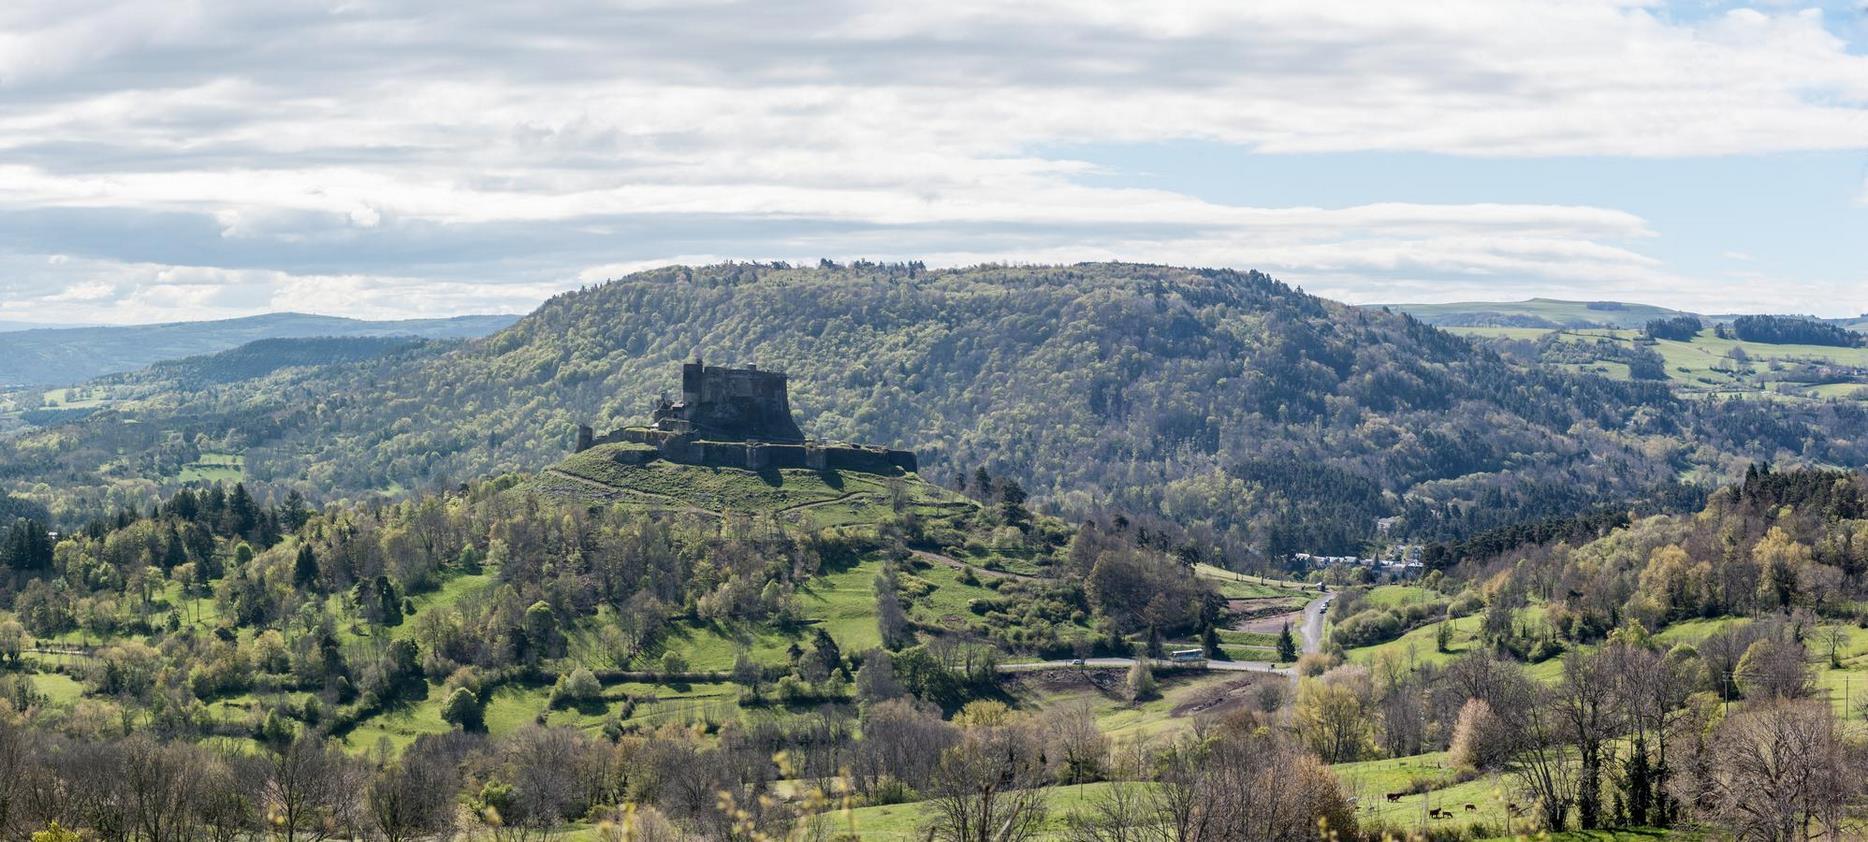 Panoramic of the castle of Murol, with a view of the Volcanoes of Auvergne